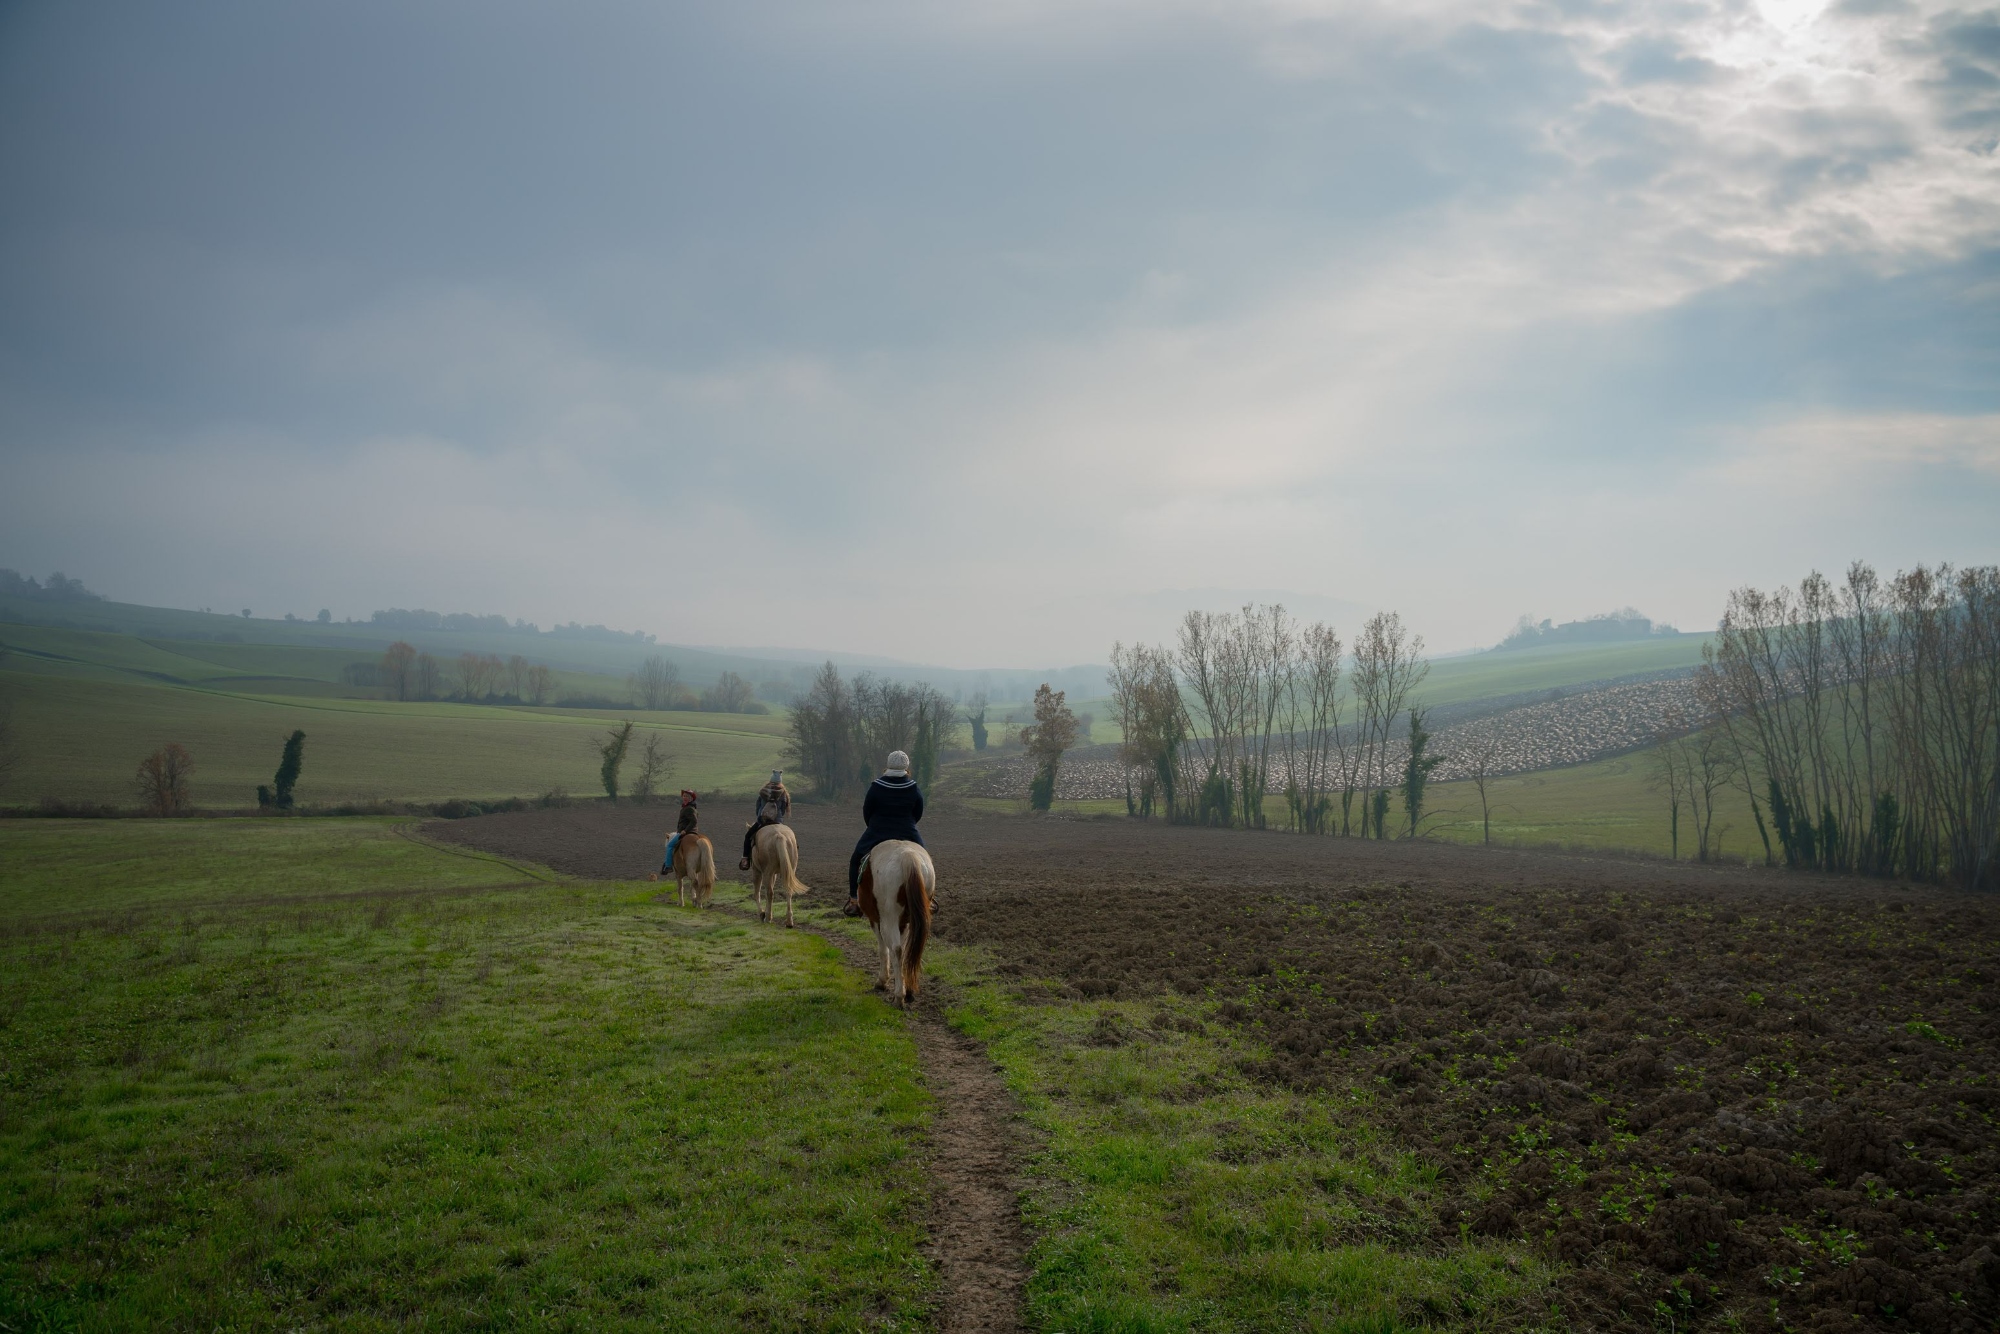 The Mugello is a great destination for all horse lovers